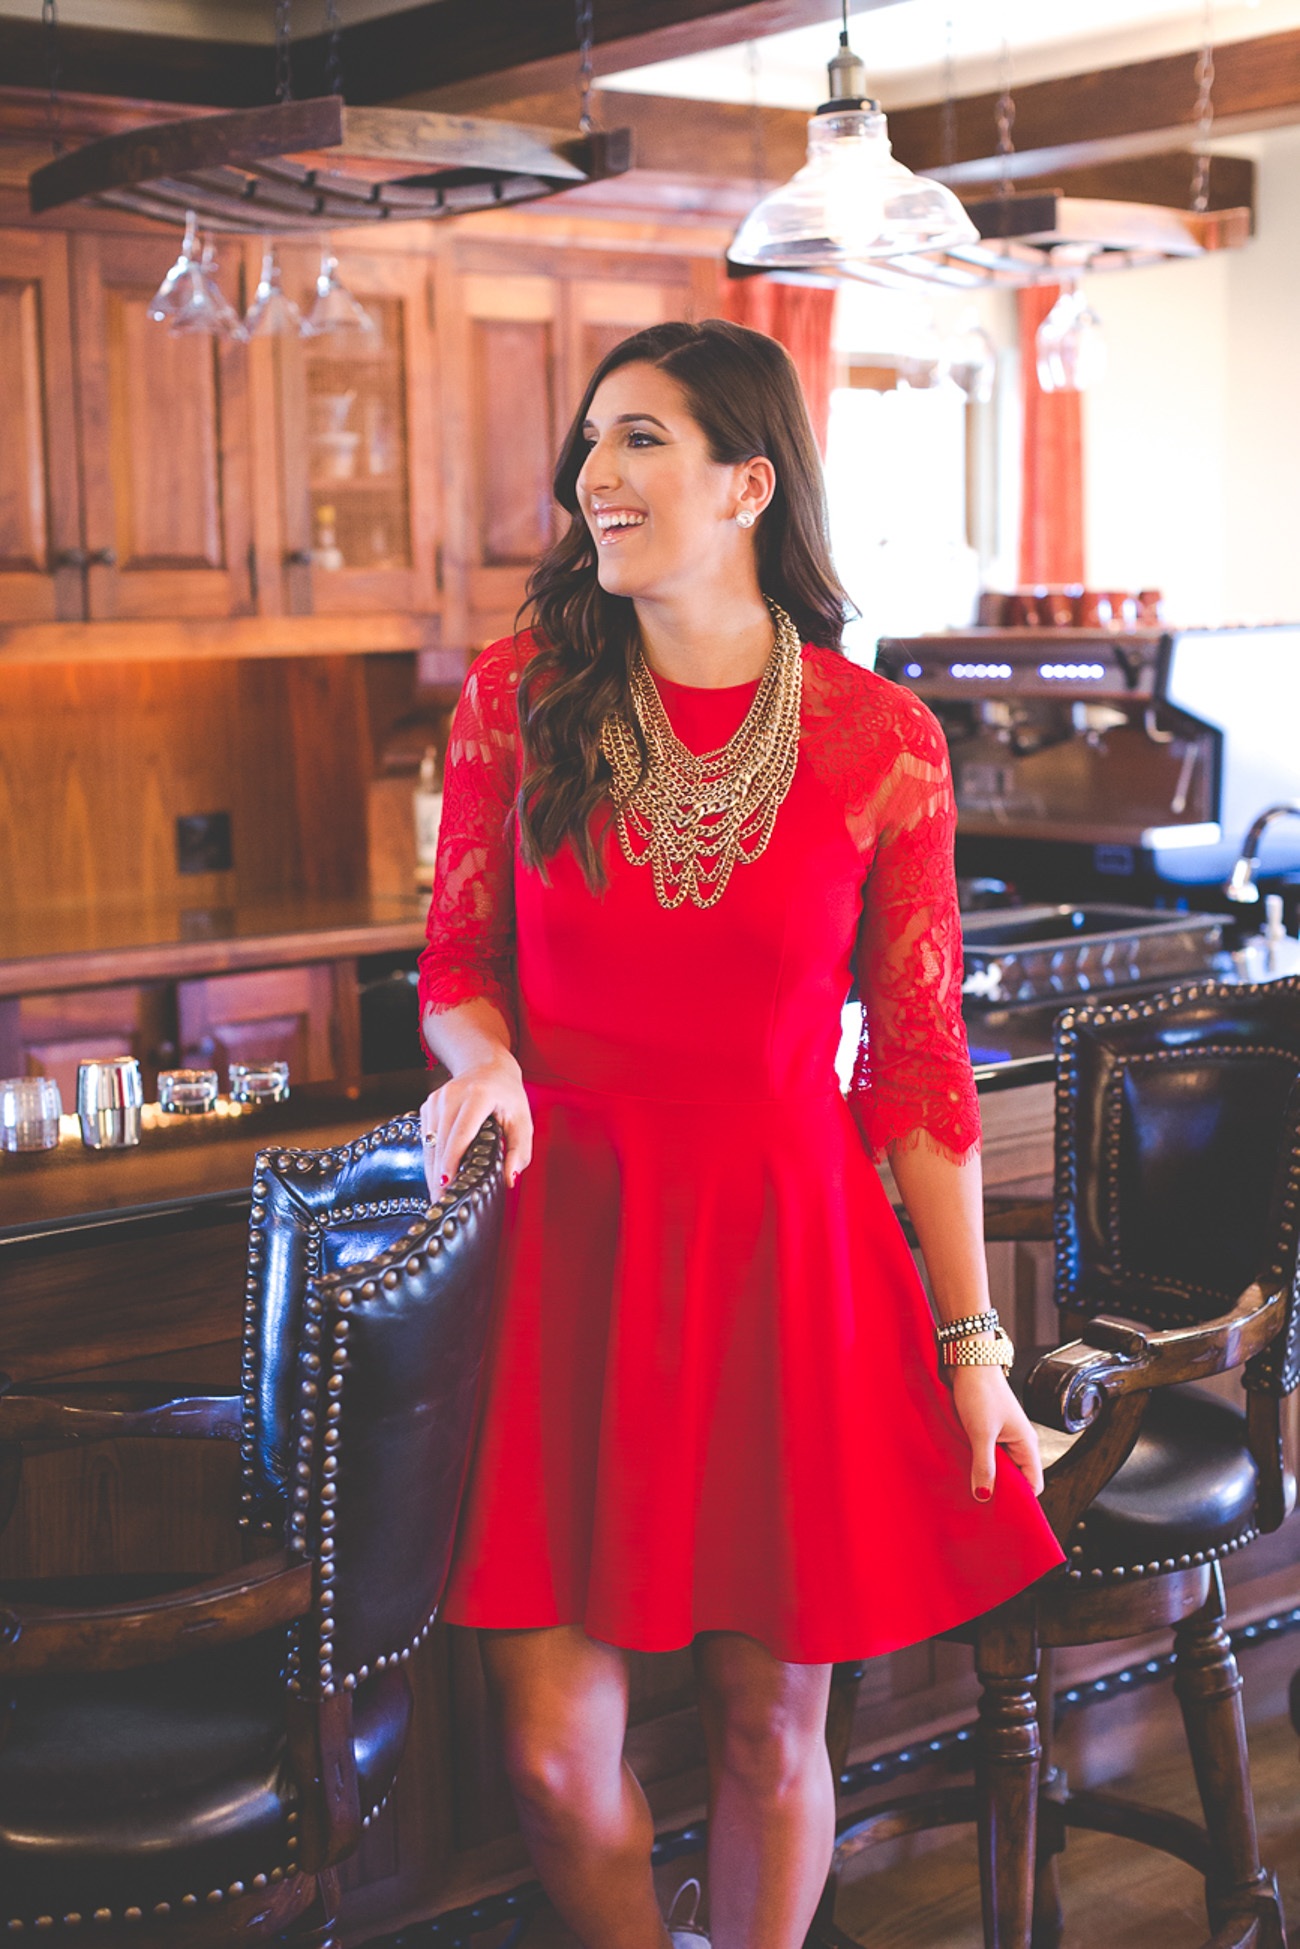 bb dakota fit and flare dress, holiday dress, nordstrom dress, holiday outfit ideas, little red dress, lace up pump, taupe pumps, statement necklace, chain statement bib, holiday makeup, nude lip, lace dress // grace wainwright from a southern drawl